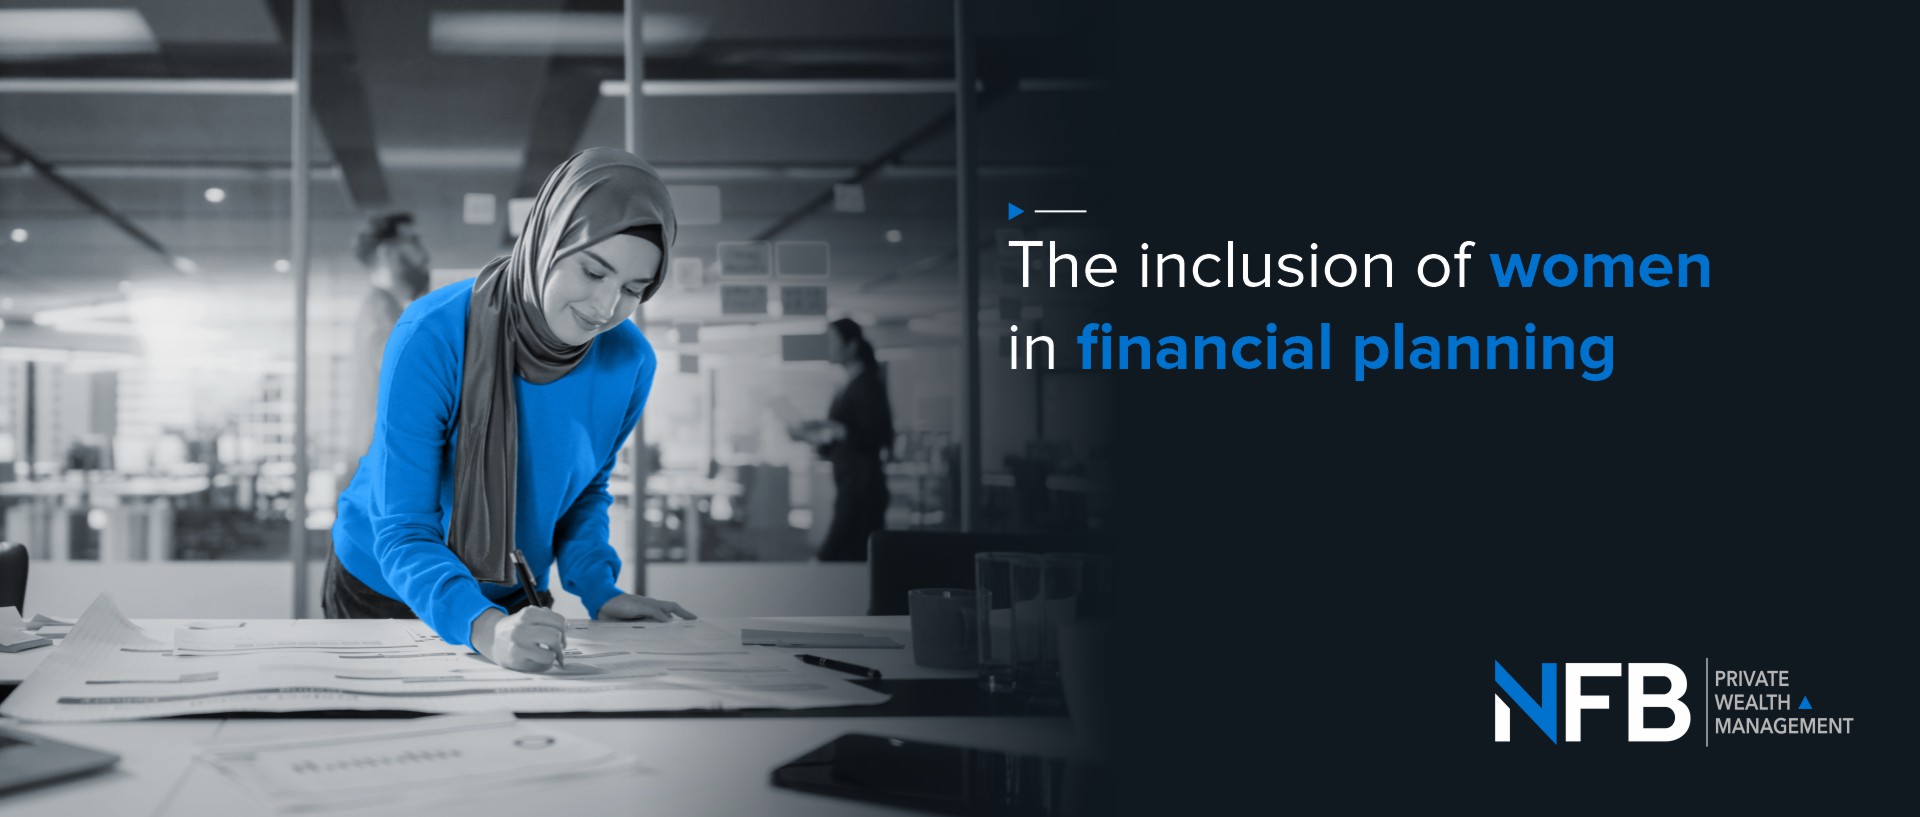 The inclusion of women in financial planning 